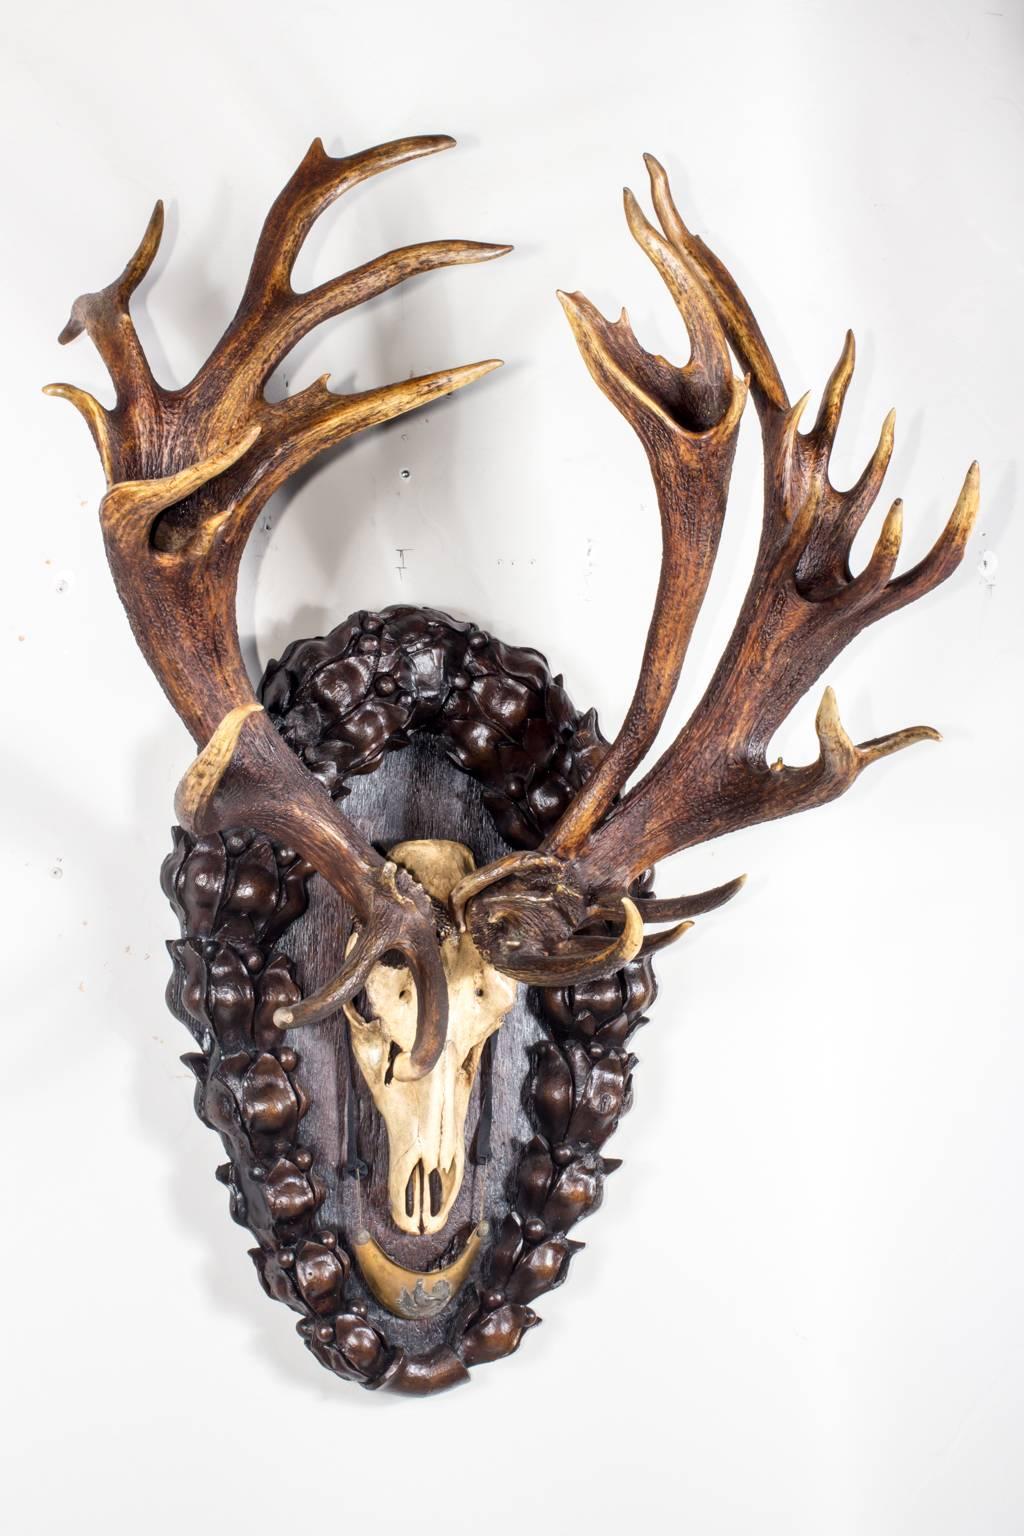 Magnificent 3 beam red stag trophy from Eckartsau Castle, Austria which was a residence of Emperor Franz Joseph and a favorite Habsburg hunting schloss (originally purchased by Archduke Franz Ferdinand from the Knights of Eckartsau).  Mounted onto